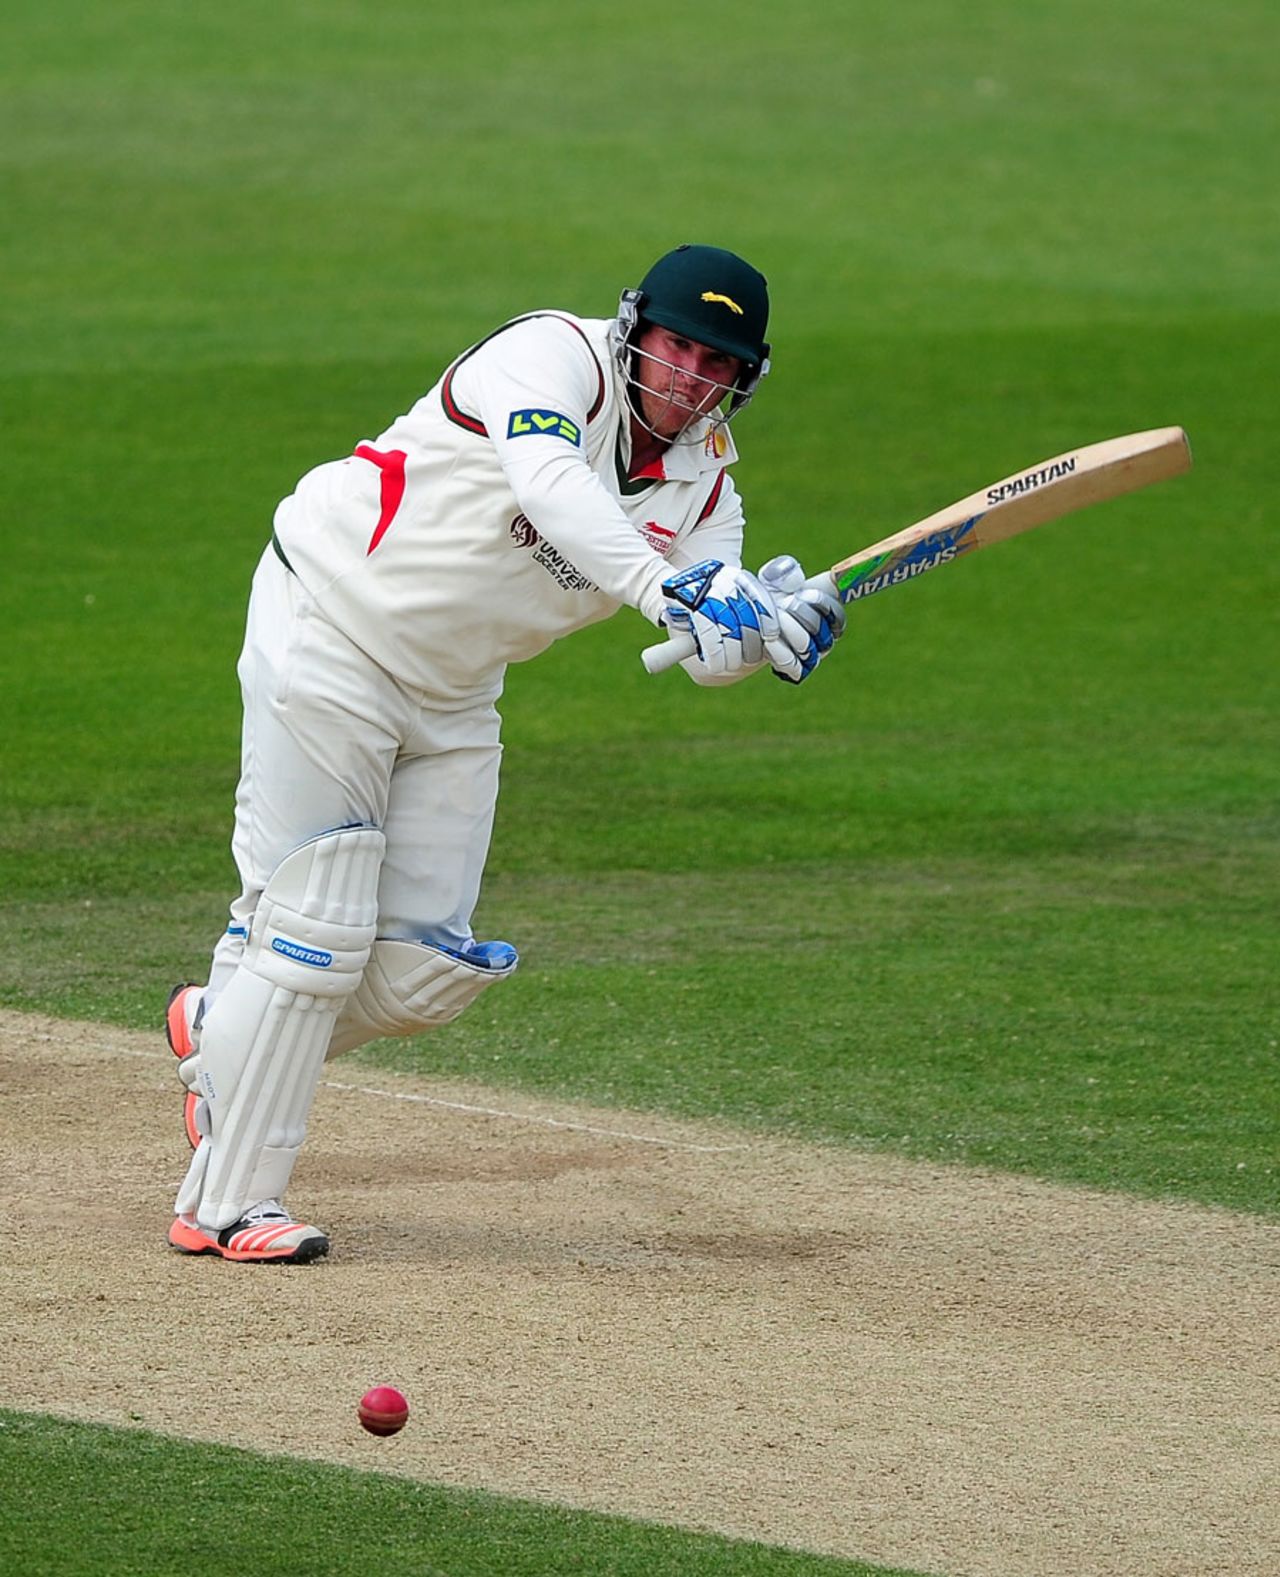 Mark Cosgrove flicks to leg during his innings of 44, Surrey v Leicestershire, County Championship, Division Two, 3rd day, Kia Oval, May 12, 2015